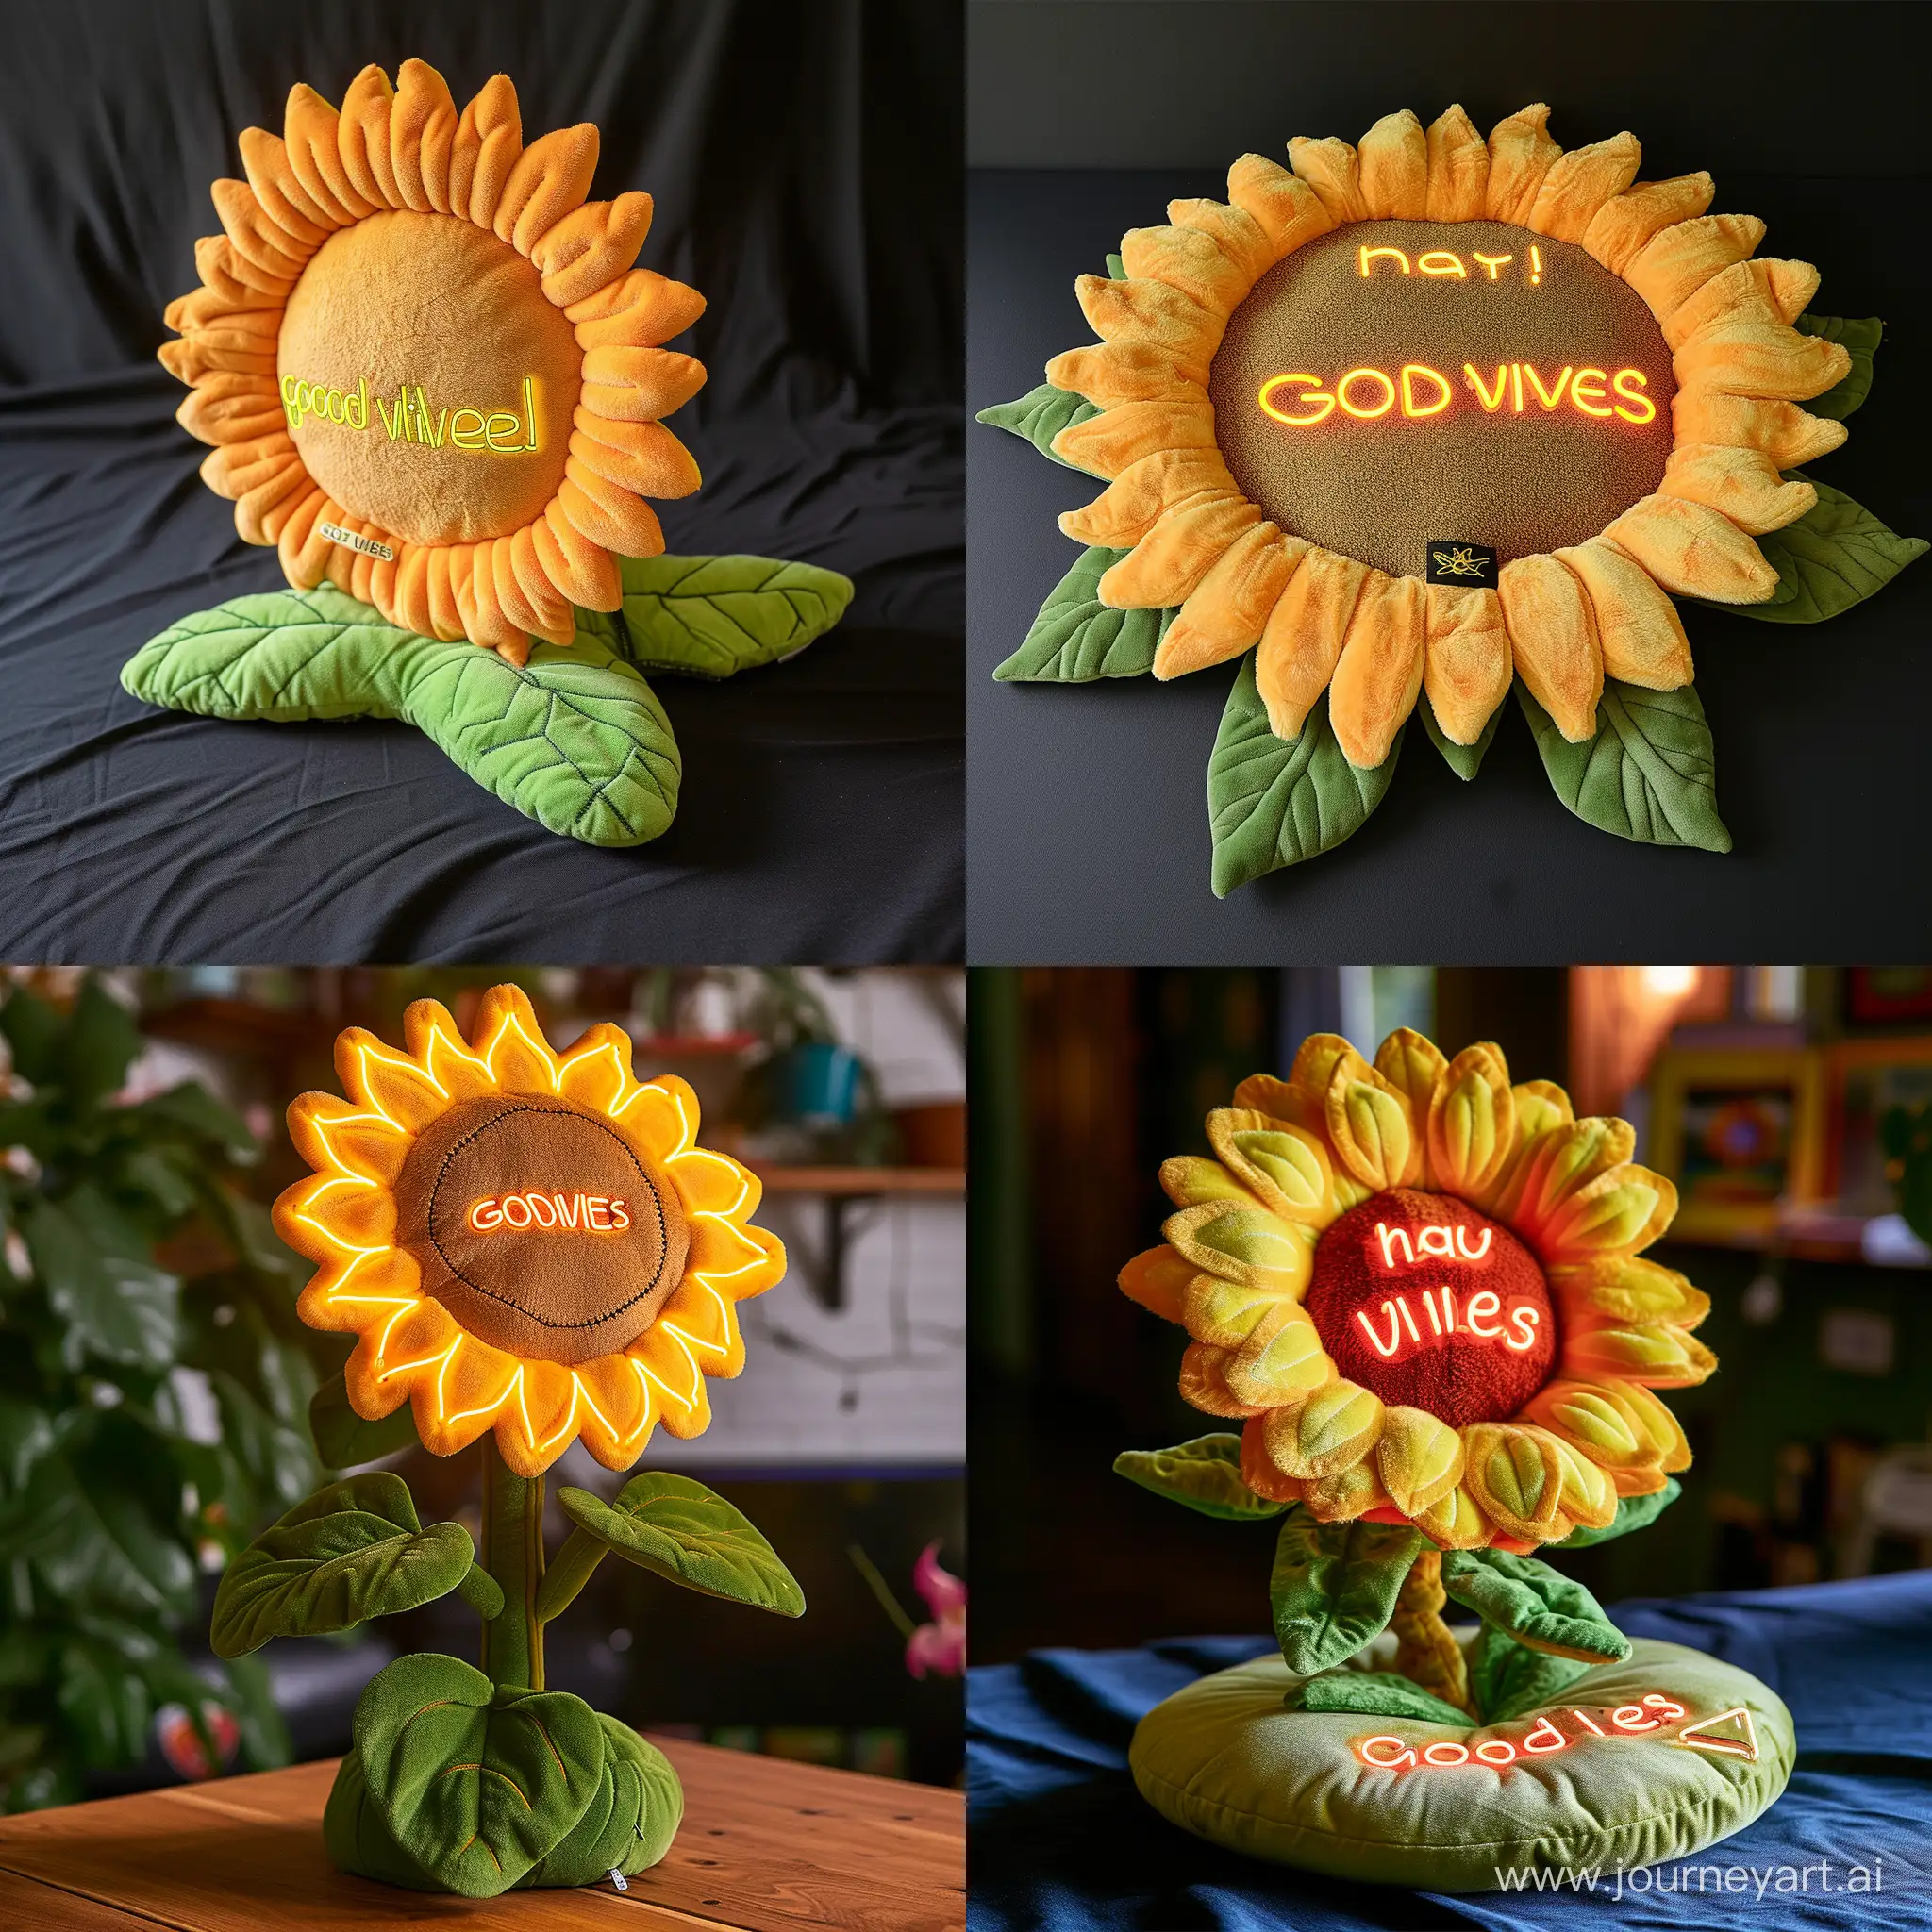 plush in the shape of a sunflower and says have a text "goodvibes" in neon